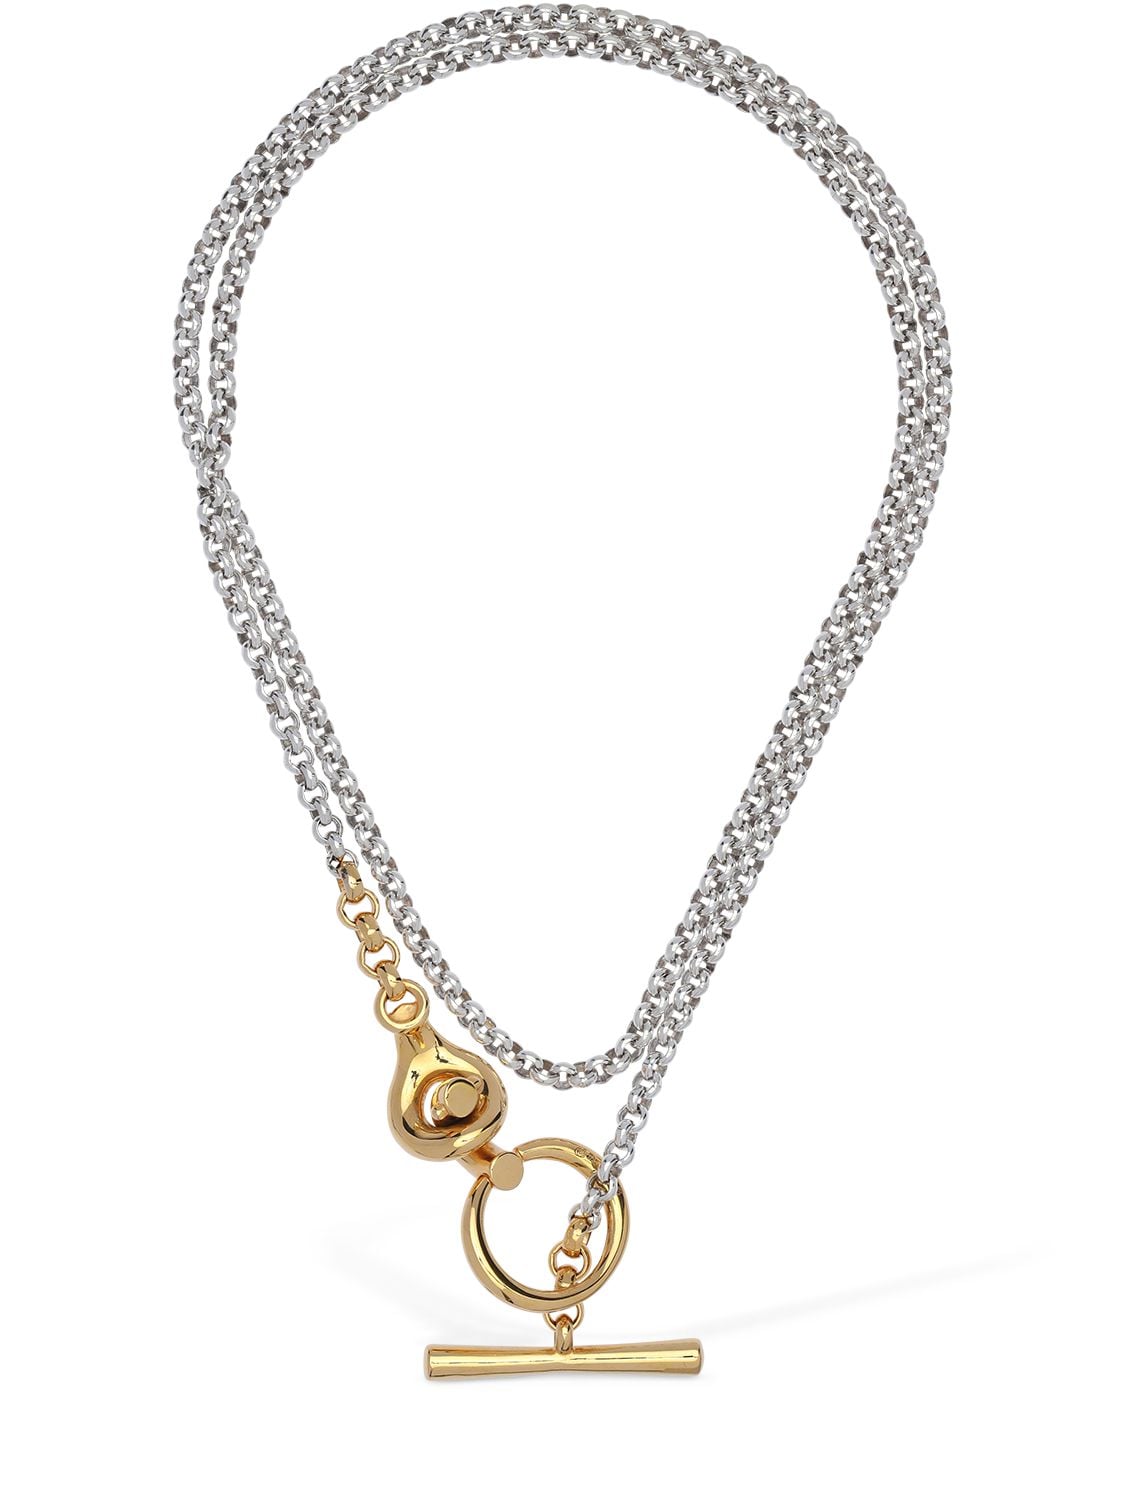 Charlotte Chesnais Halo Two Tone Chain Necklace In Gold,silver